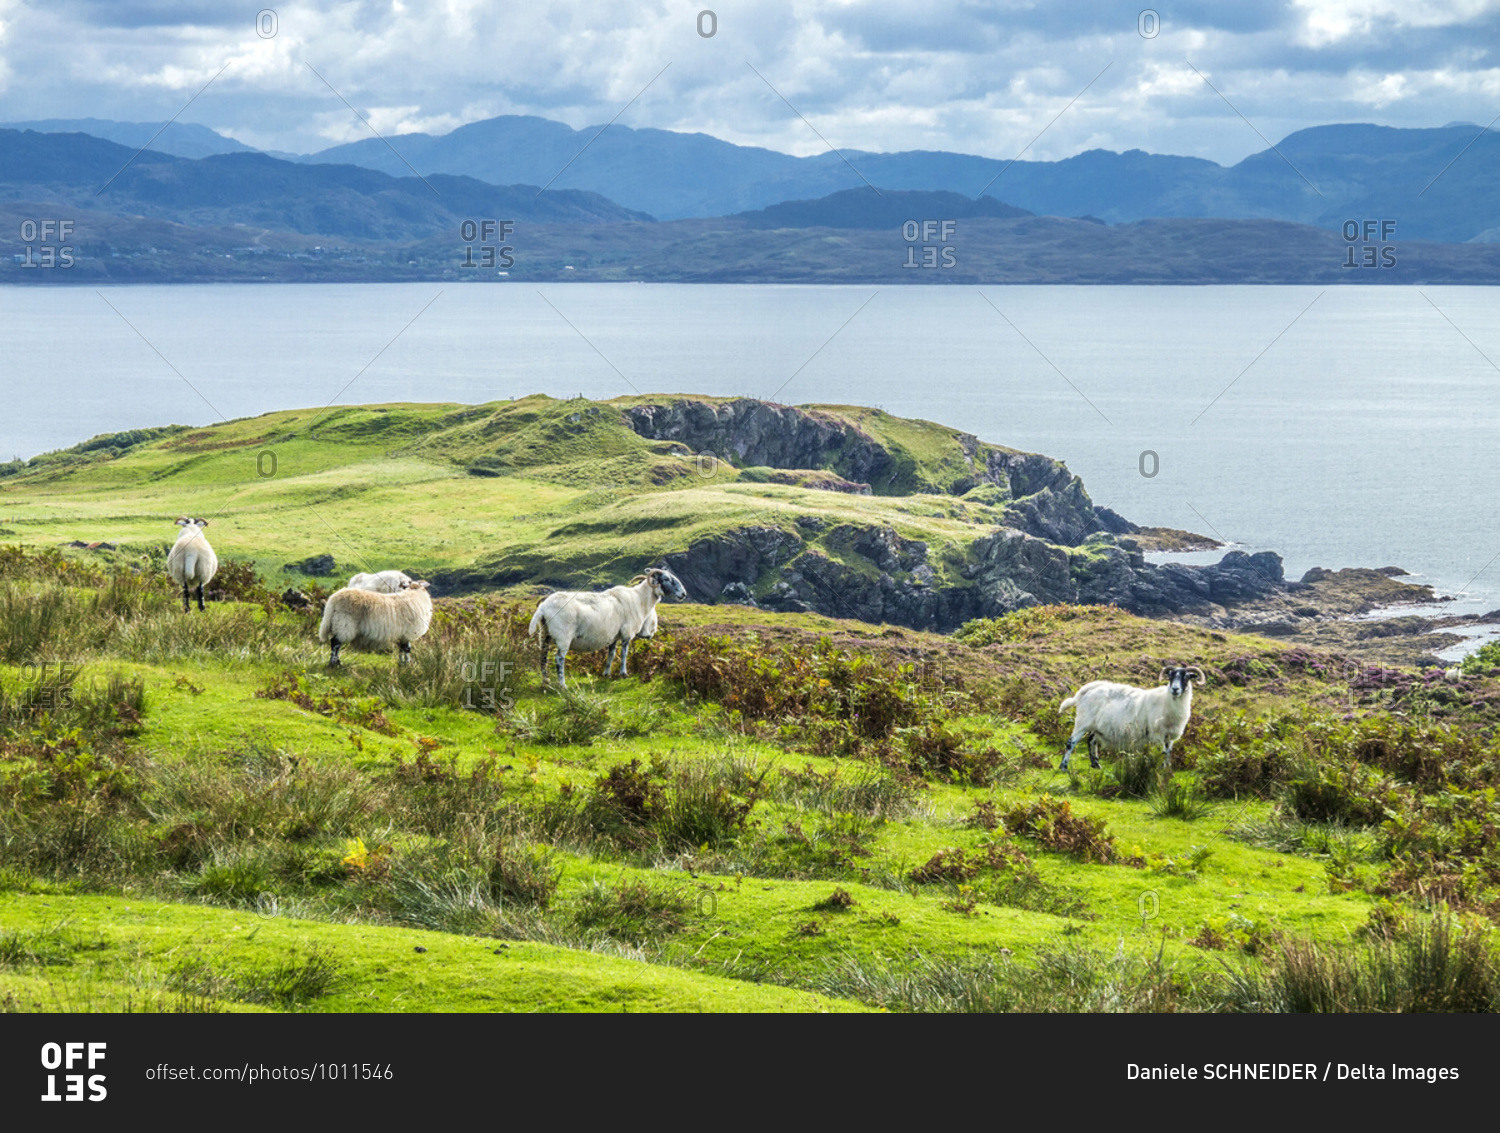 Europe, Great Britain, Scotland, Hebrides, south-east of the Isle of Skye, Point of Sleat, grazing Scottish Blackface sheeps facing the ocean